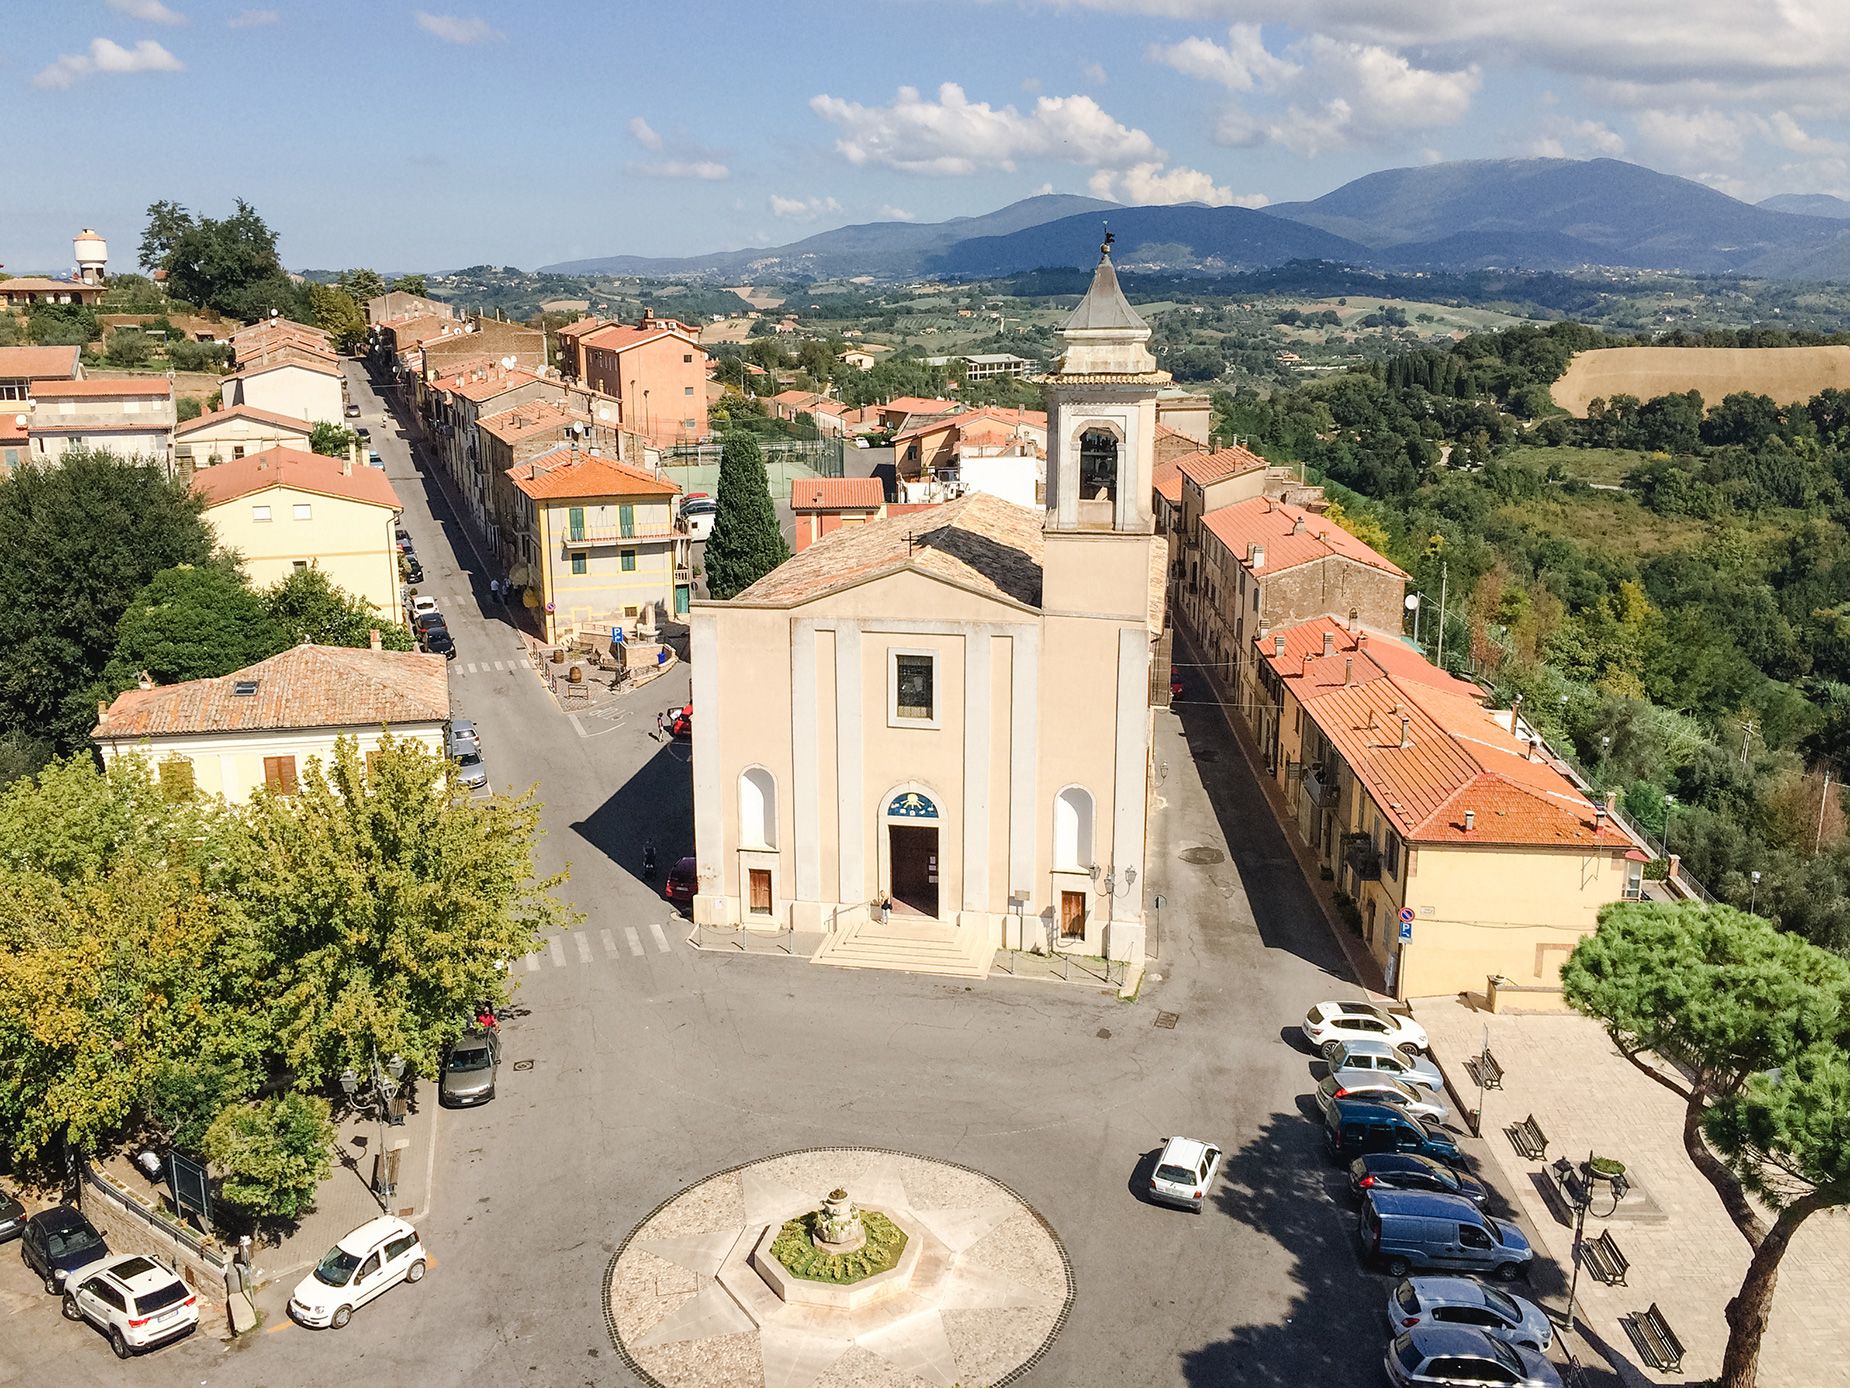 Kelly and Jess love the slower pace of life in Stimigliano, situated in the Lazio region of Italy.